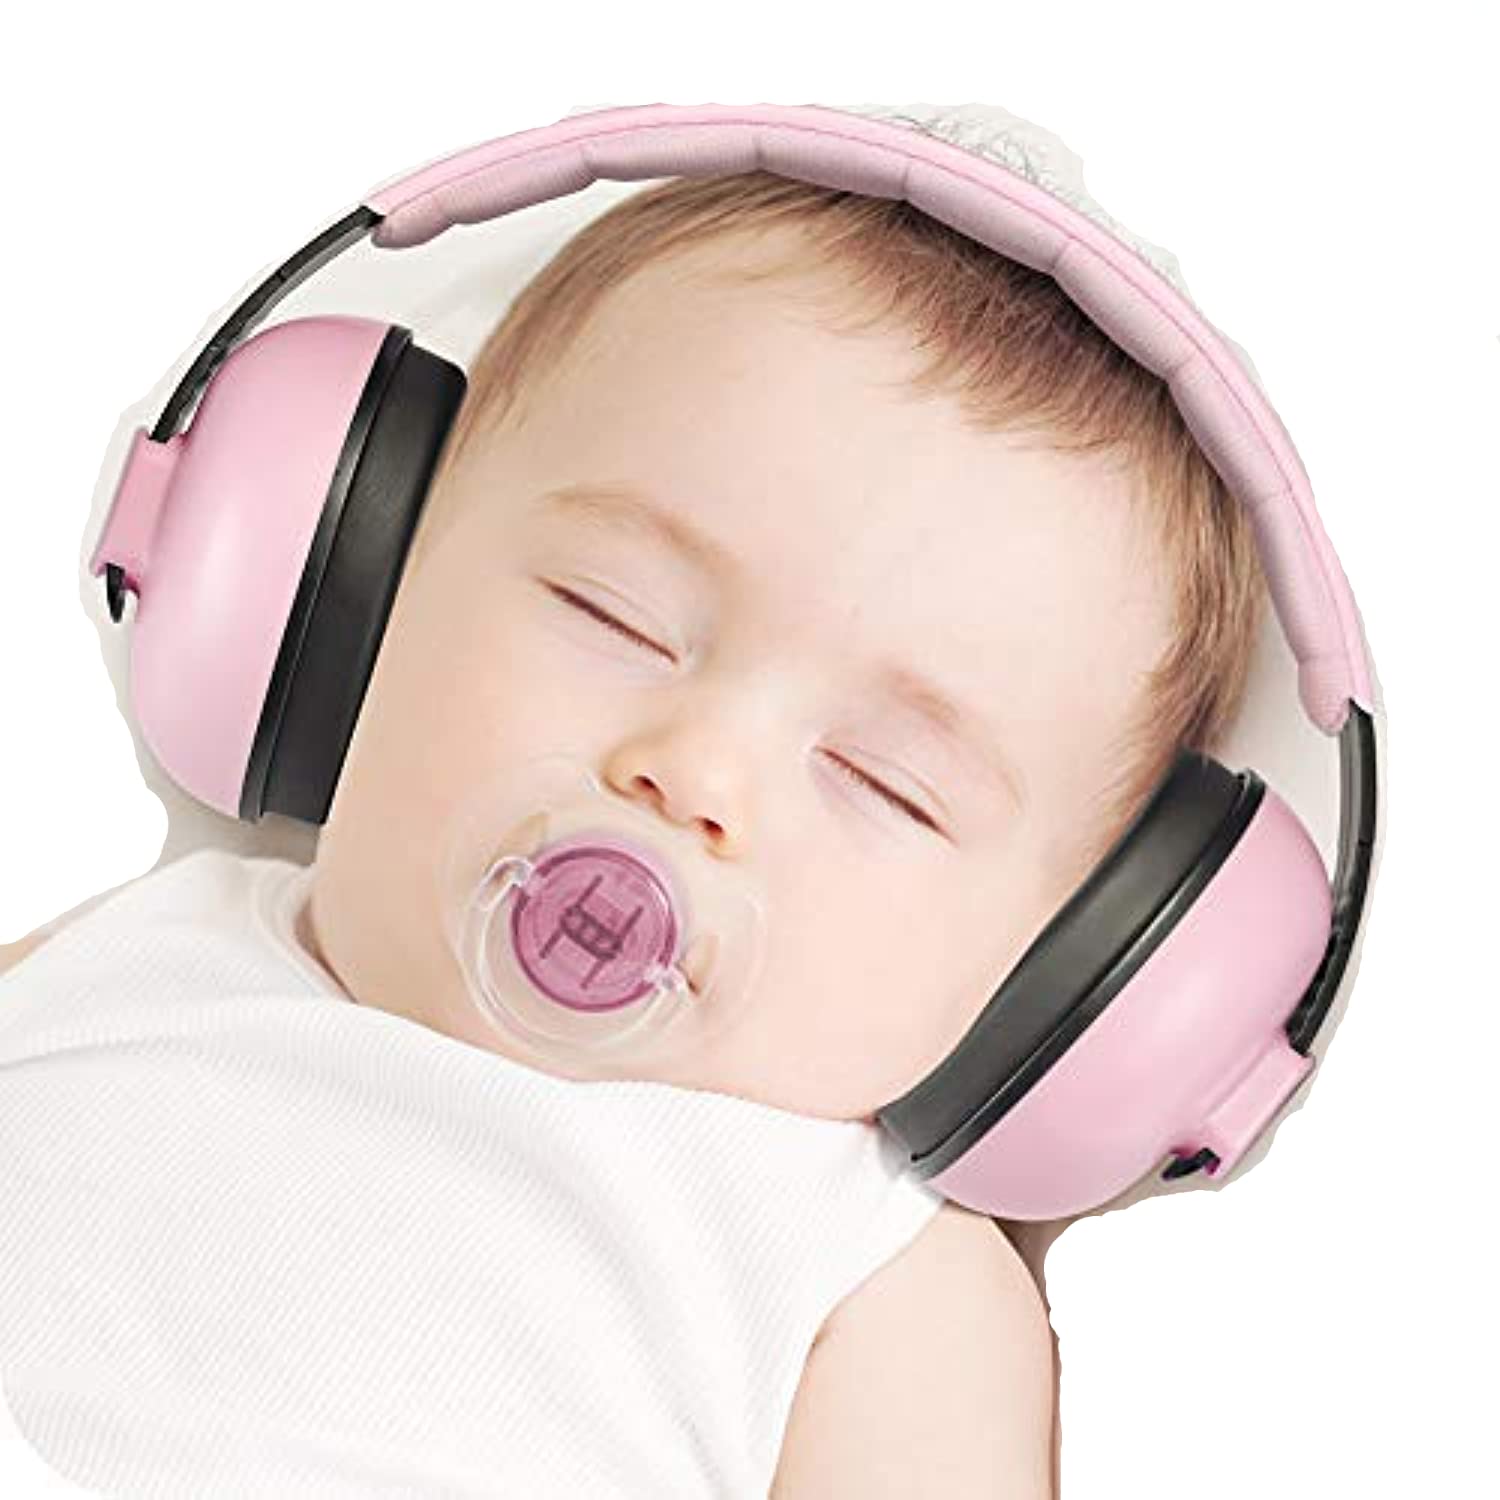 Mumba Baby Ear Protection Noise Cancelling Headphones for Babies and Toddlers Baby Earmuffs - Ages 3-24+ Months